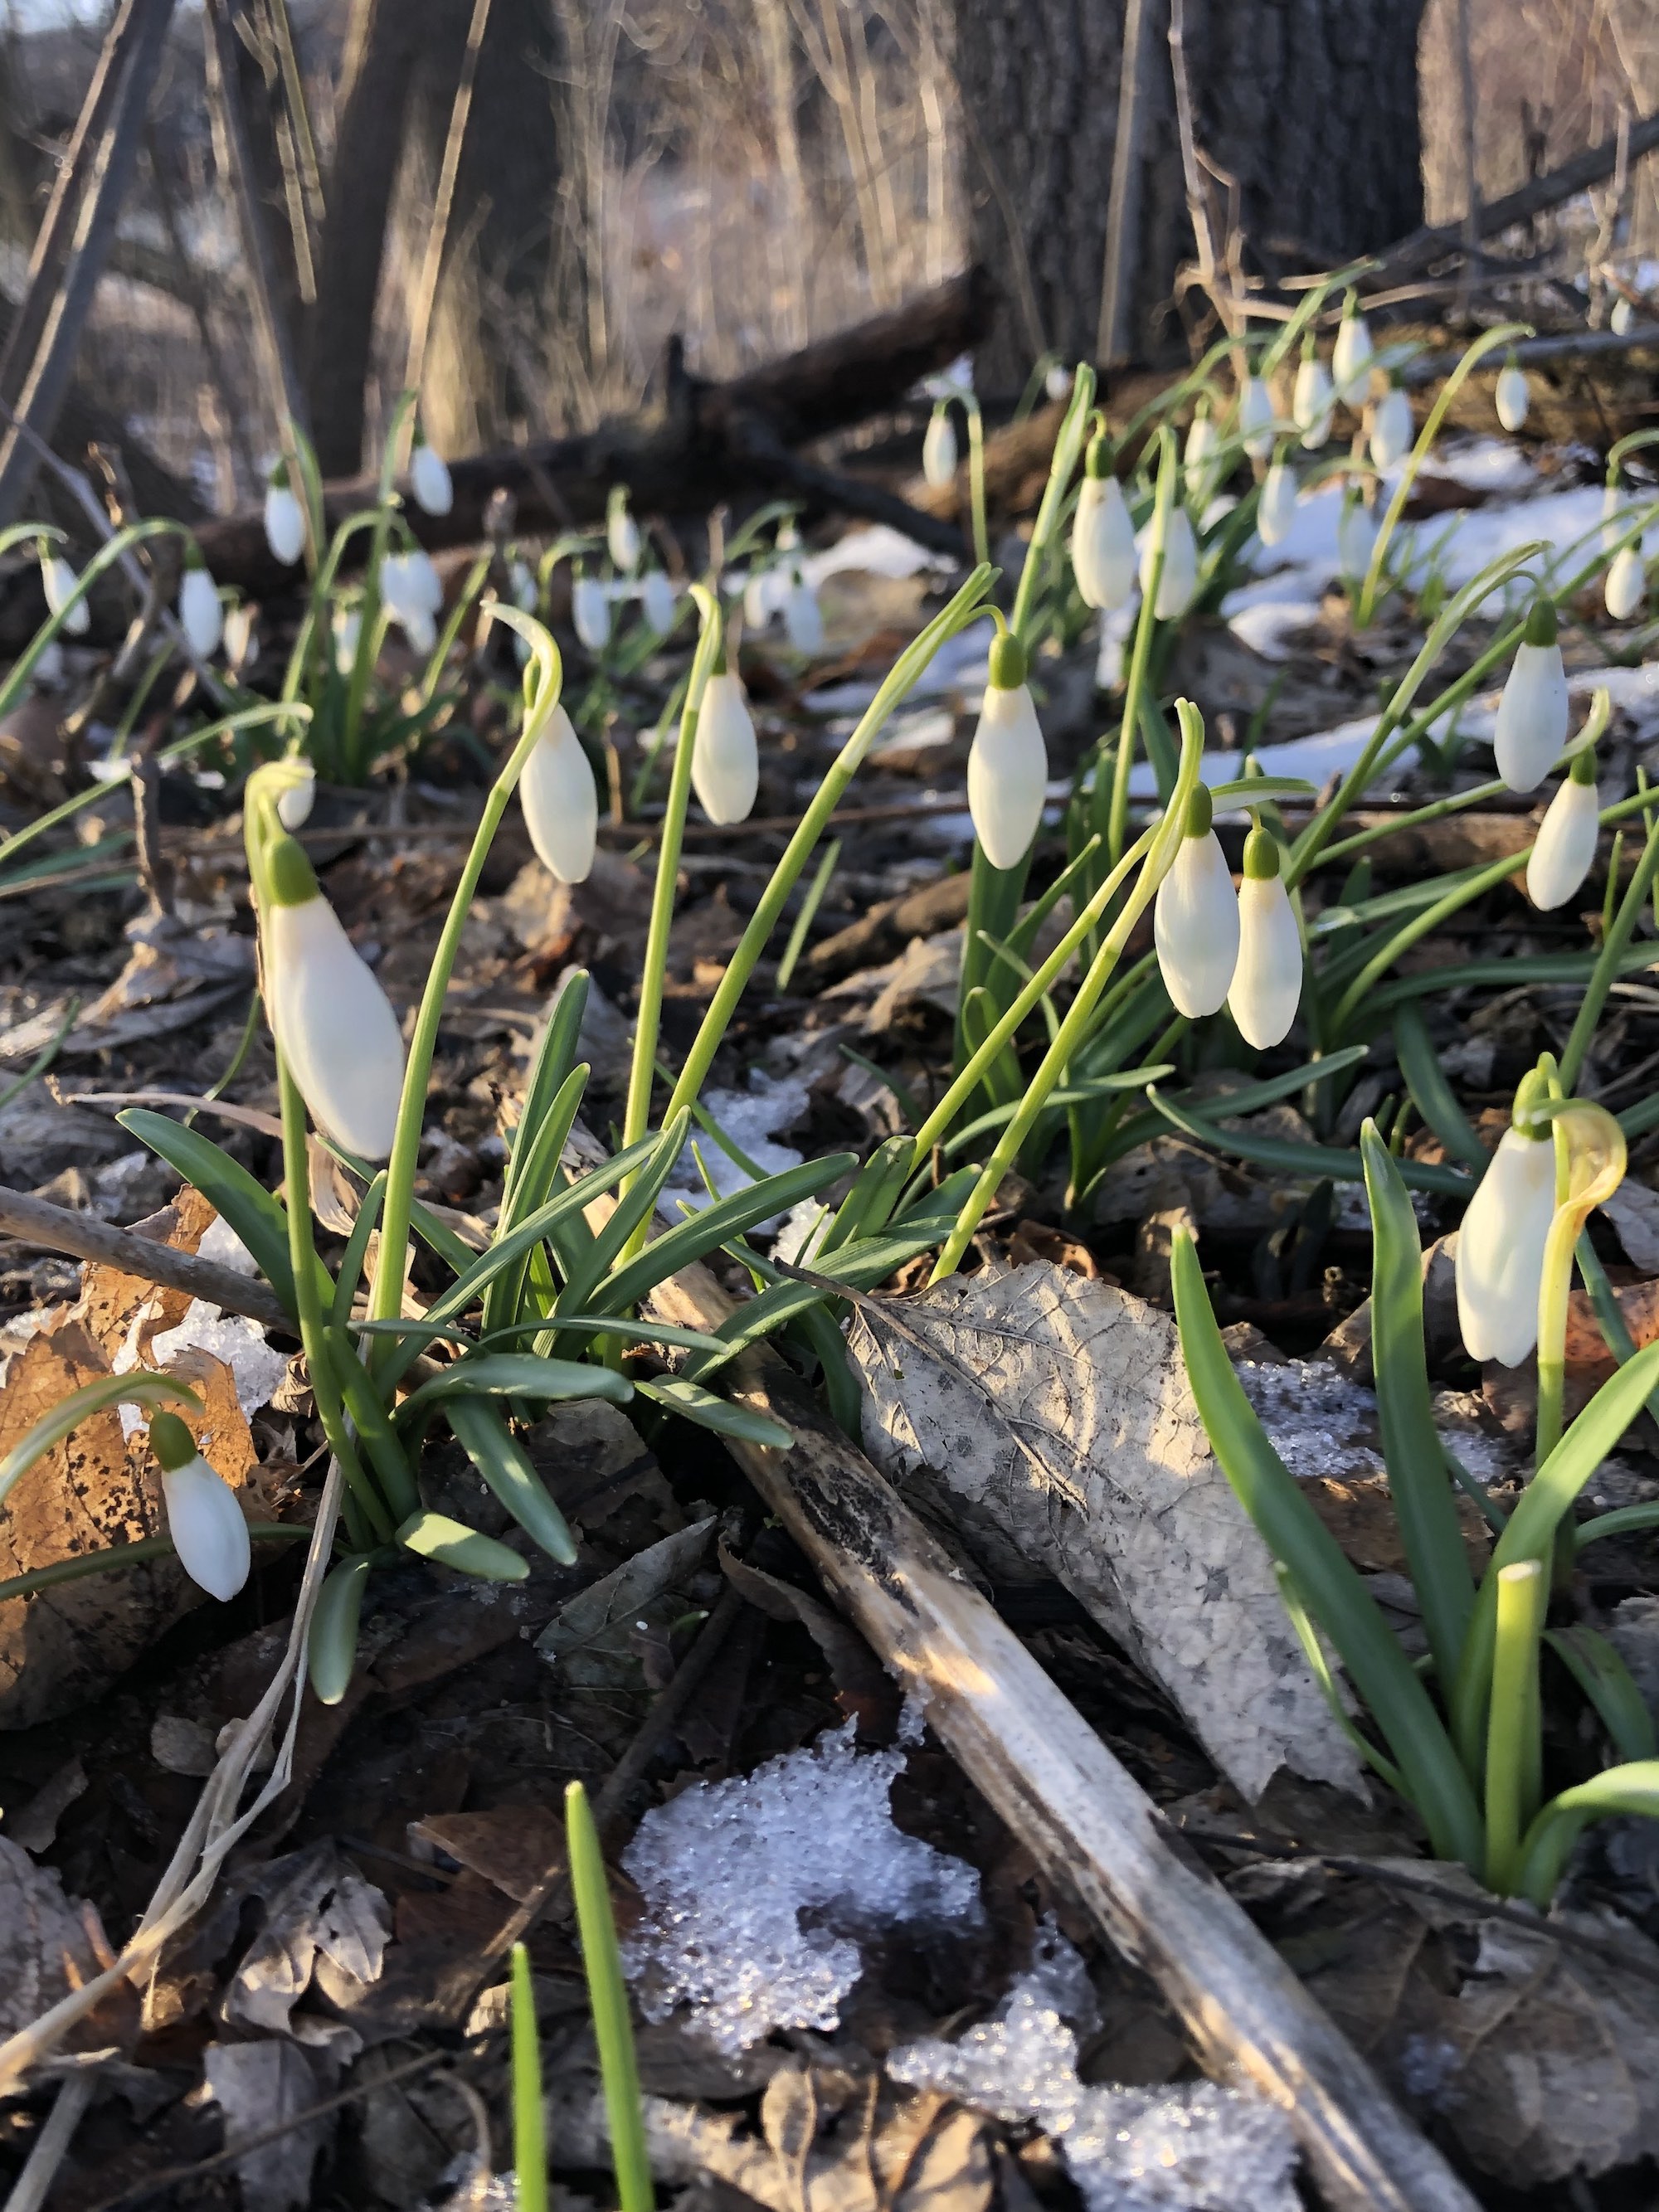 Snowdrops emerging in Madison Wisconsin along Arbor Drive on March 18, 2021.